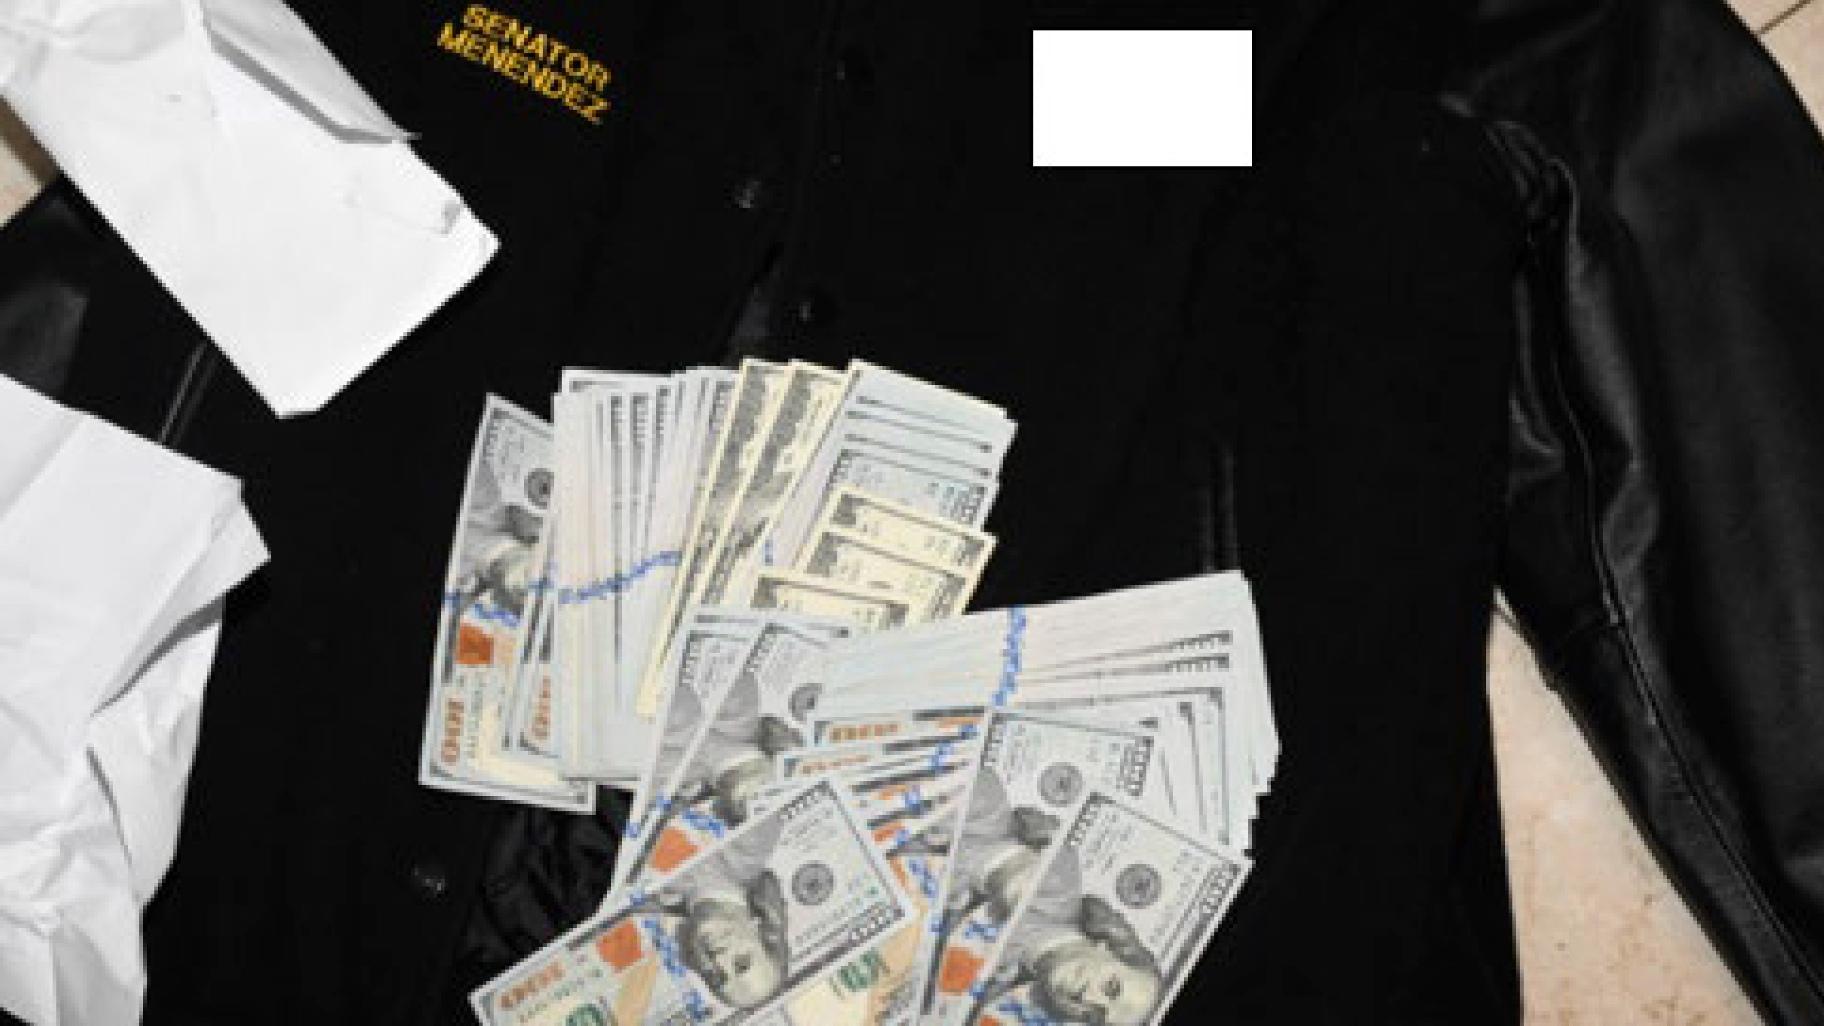 This photo, which was included in an indictment of U.S. Sen. Bob Menendez (D-N.J.), shows a jacket bearing Menendez’s name, along with cash from envelops found inside the Jacket during a search by federal agents of the senator's home in Harrison, N.J., in 2022. (U.S. Attorney’s Office via AP)